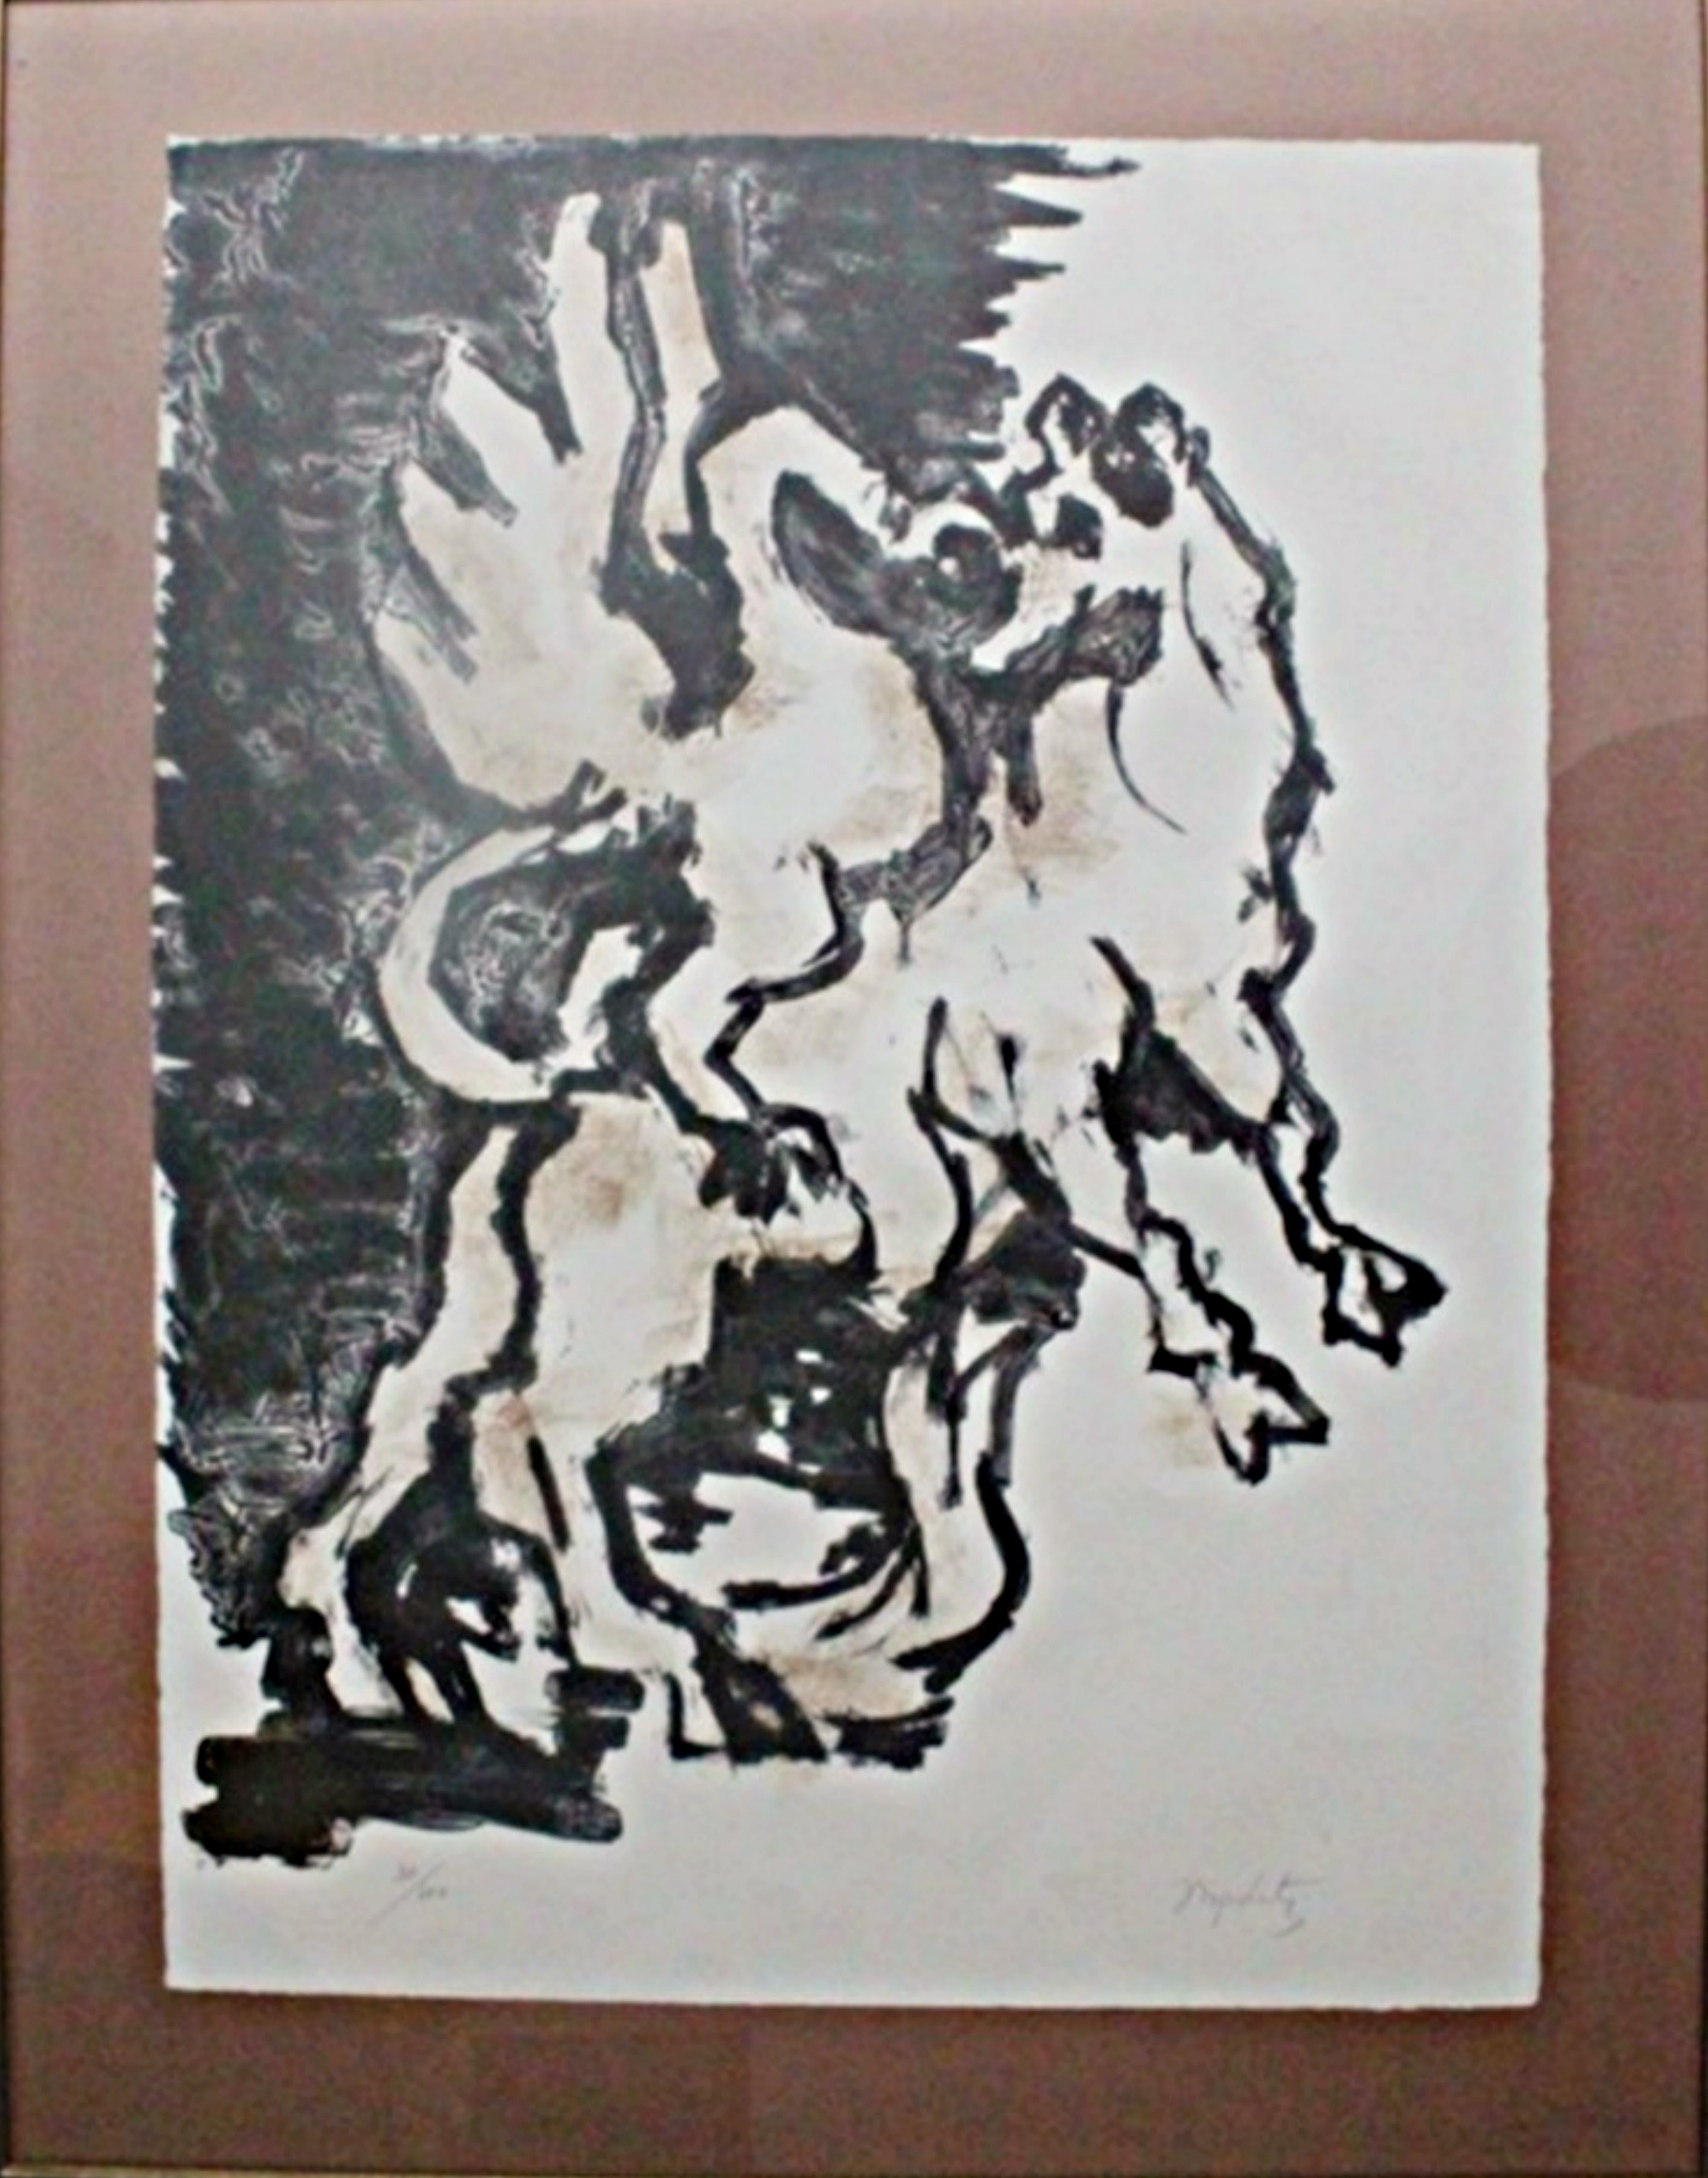 Jacques Lipchitz
The Bull and the Condor, 1962
Lithograph on Rives BFK Paper
Signed in pencil and numbered 30/100 by the artist; with the blind stamp of the publisher, Tamarind Workshop and of the master printer, Emilion Soriani.
28 × 20